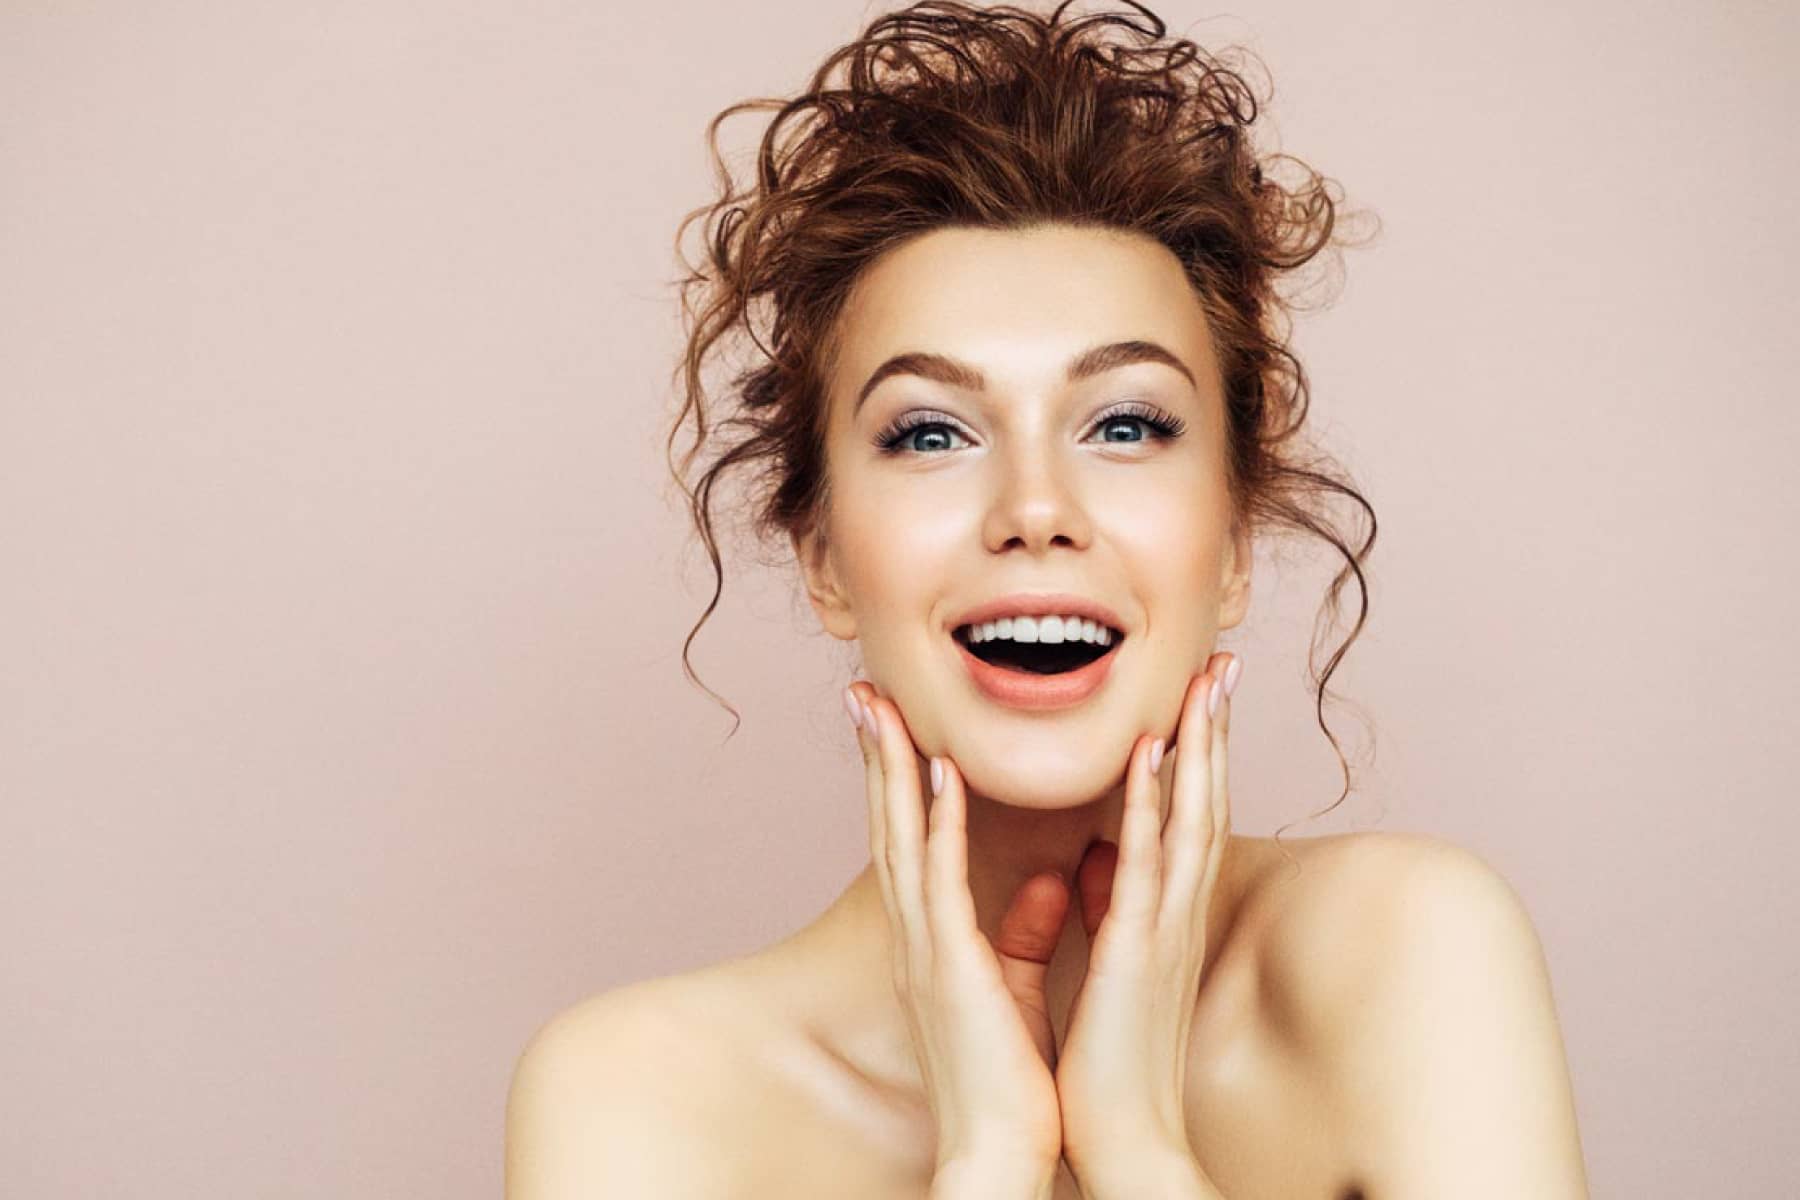 What is Radio Frequency skin tightening?